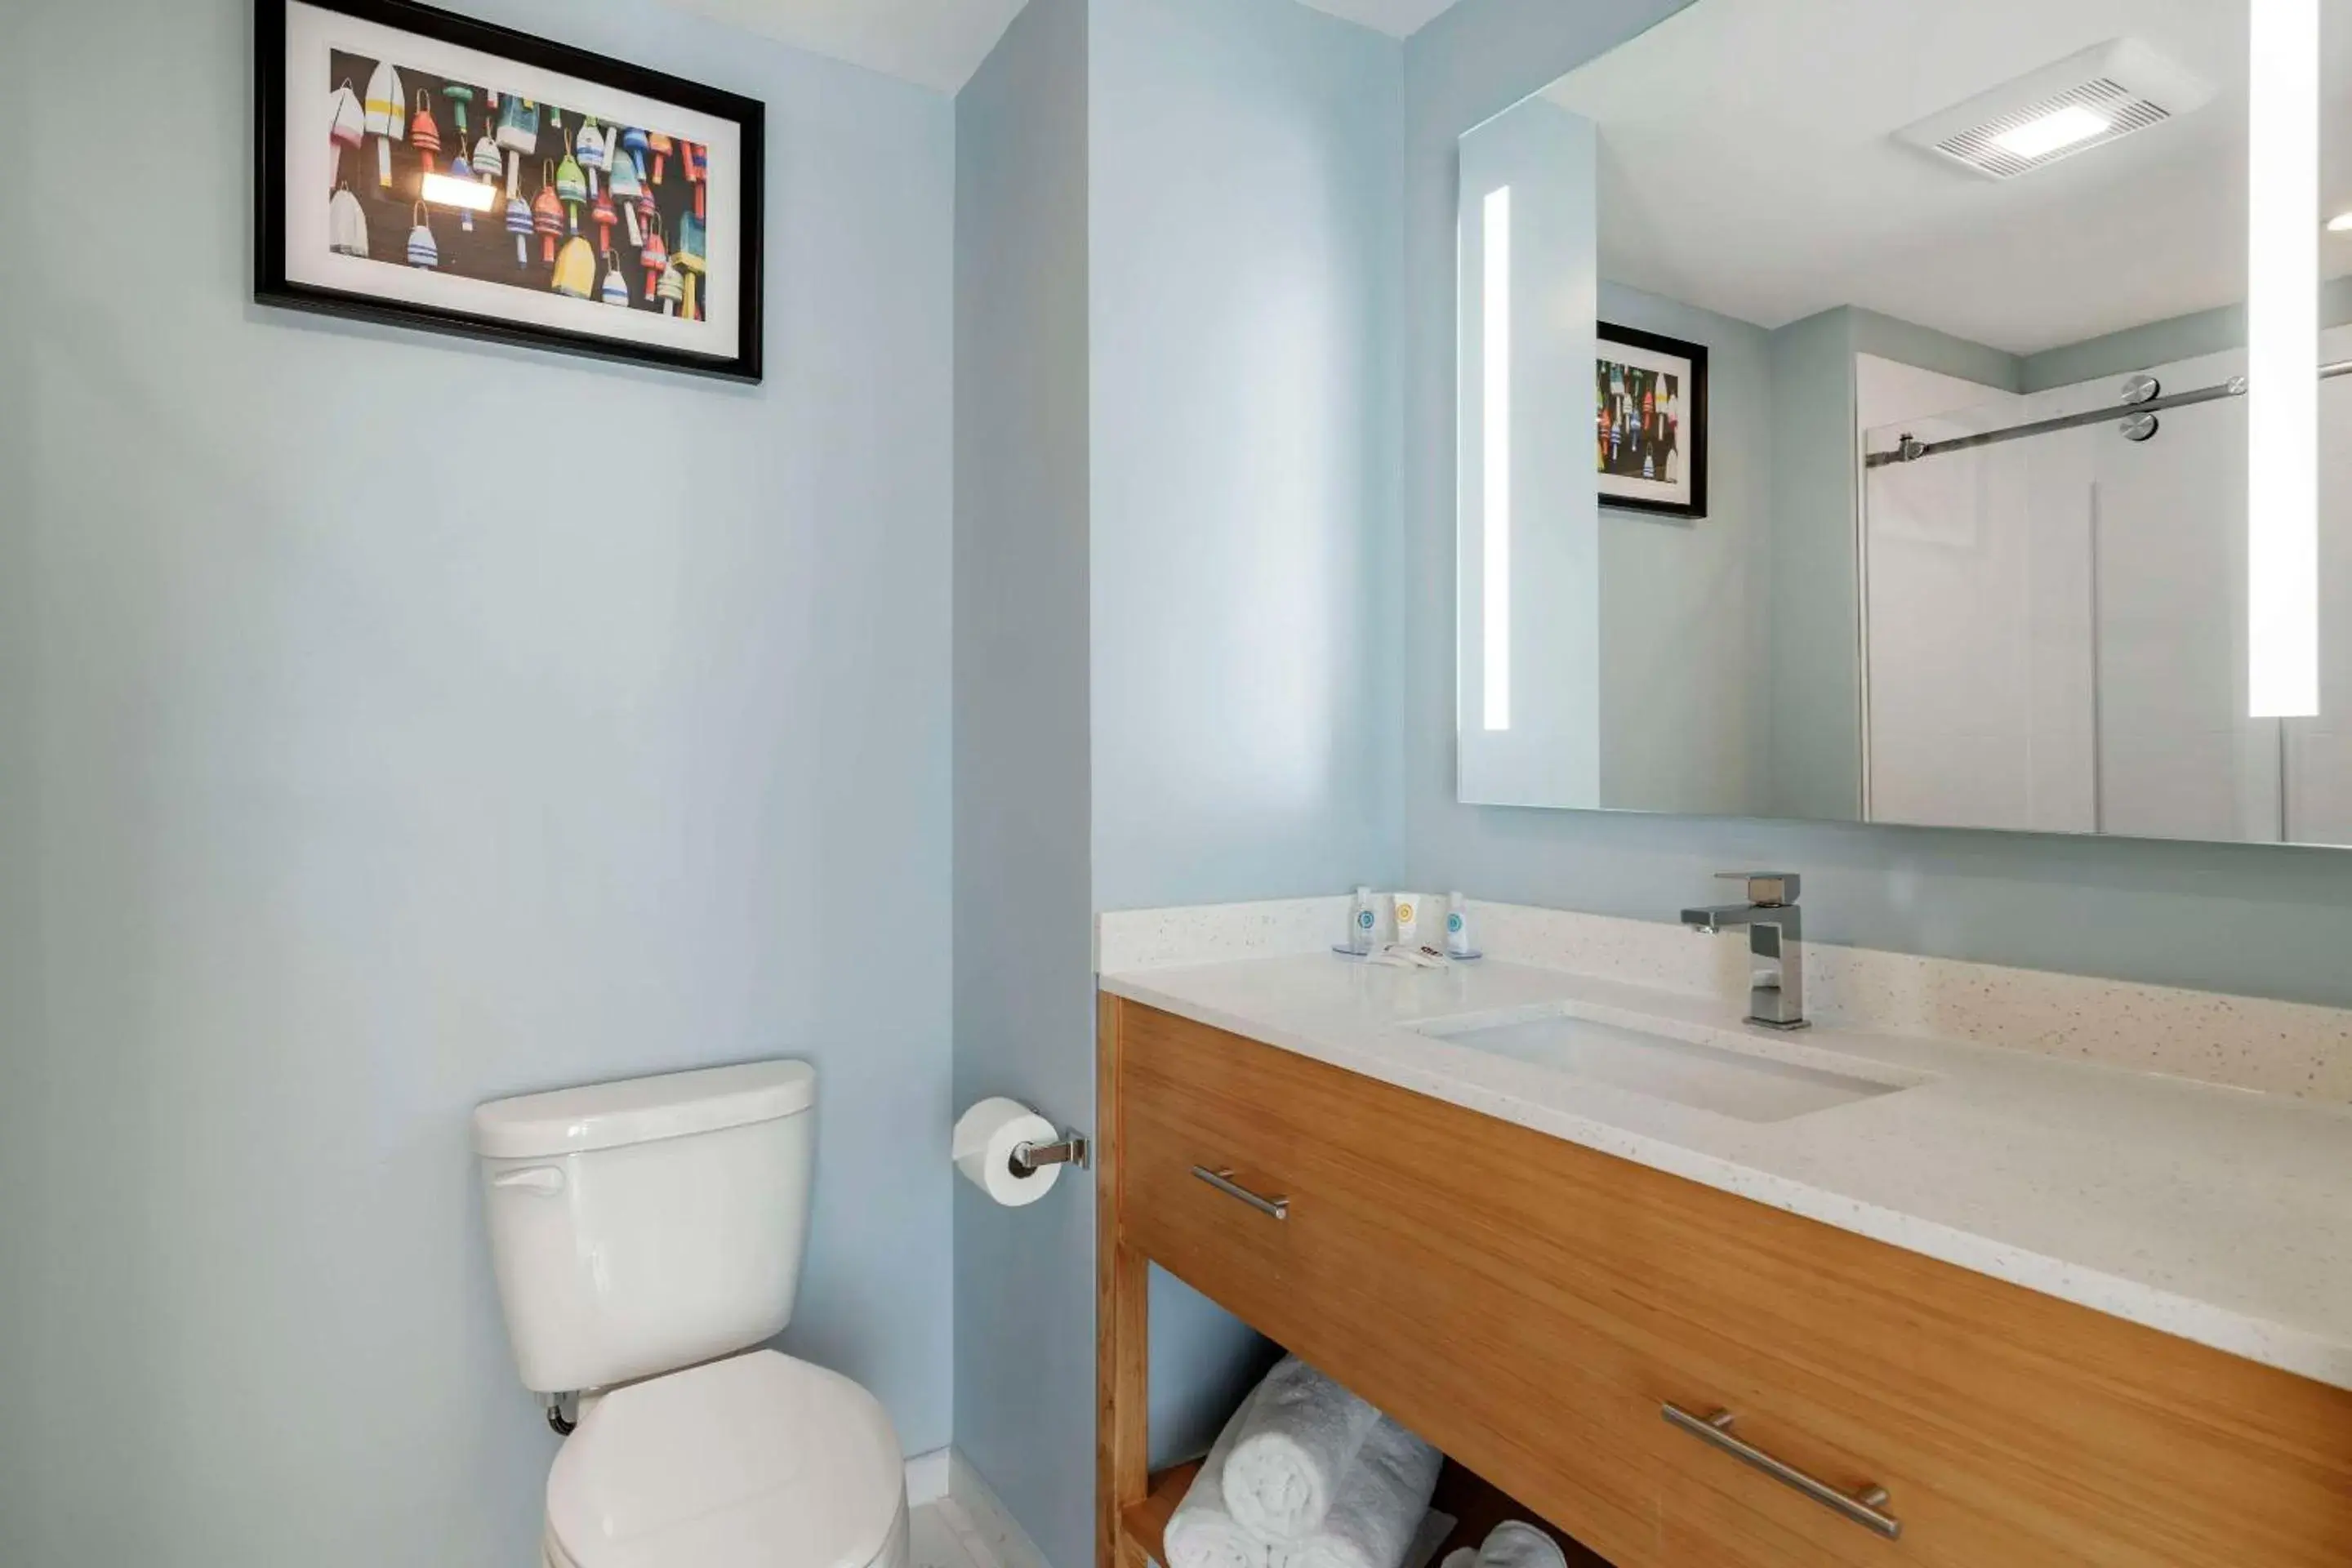 Bathroom in Casco Bay Hotel, Ascend Hotel Collection